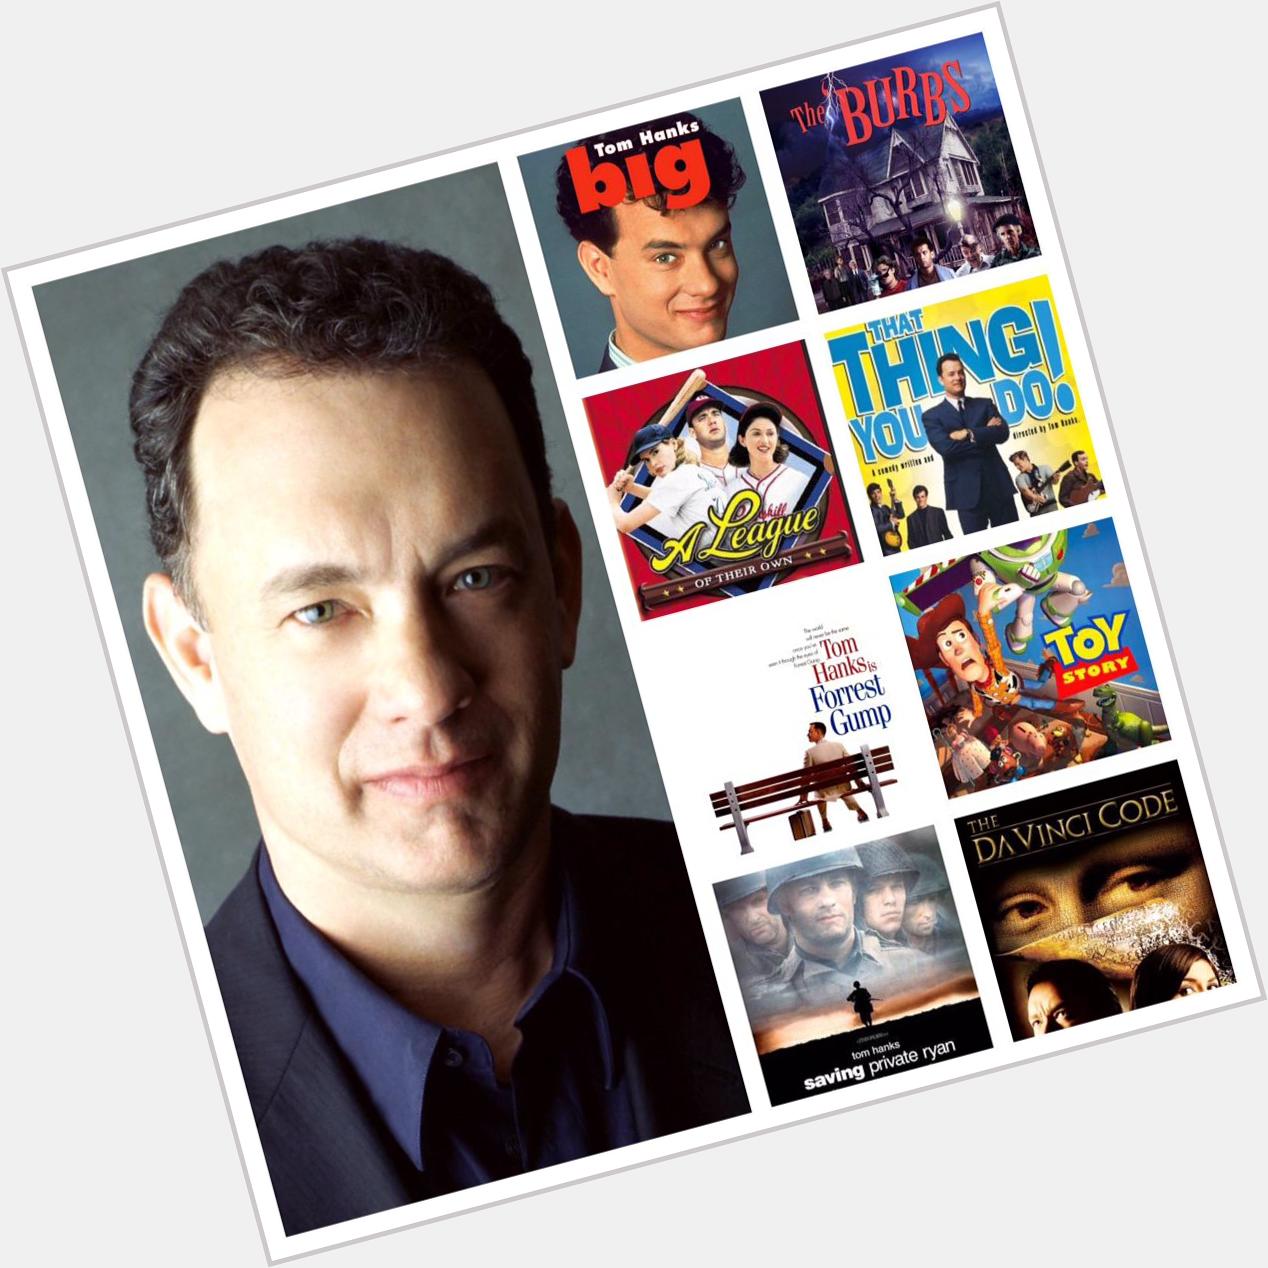 Happy birthday Tom Hanks, you are in a BIG league of your own, we love that thing do!  